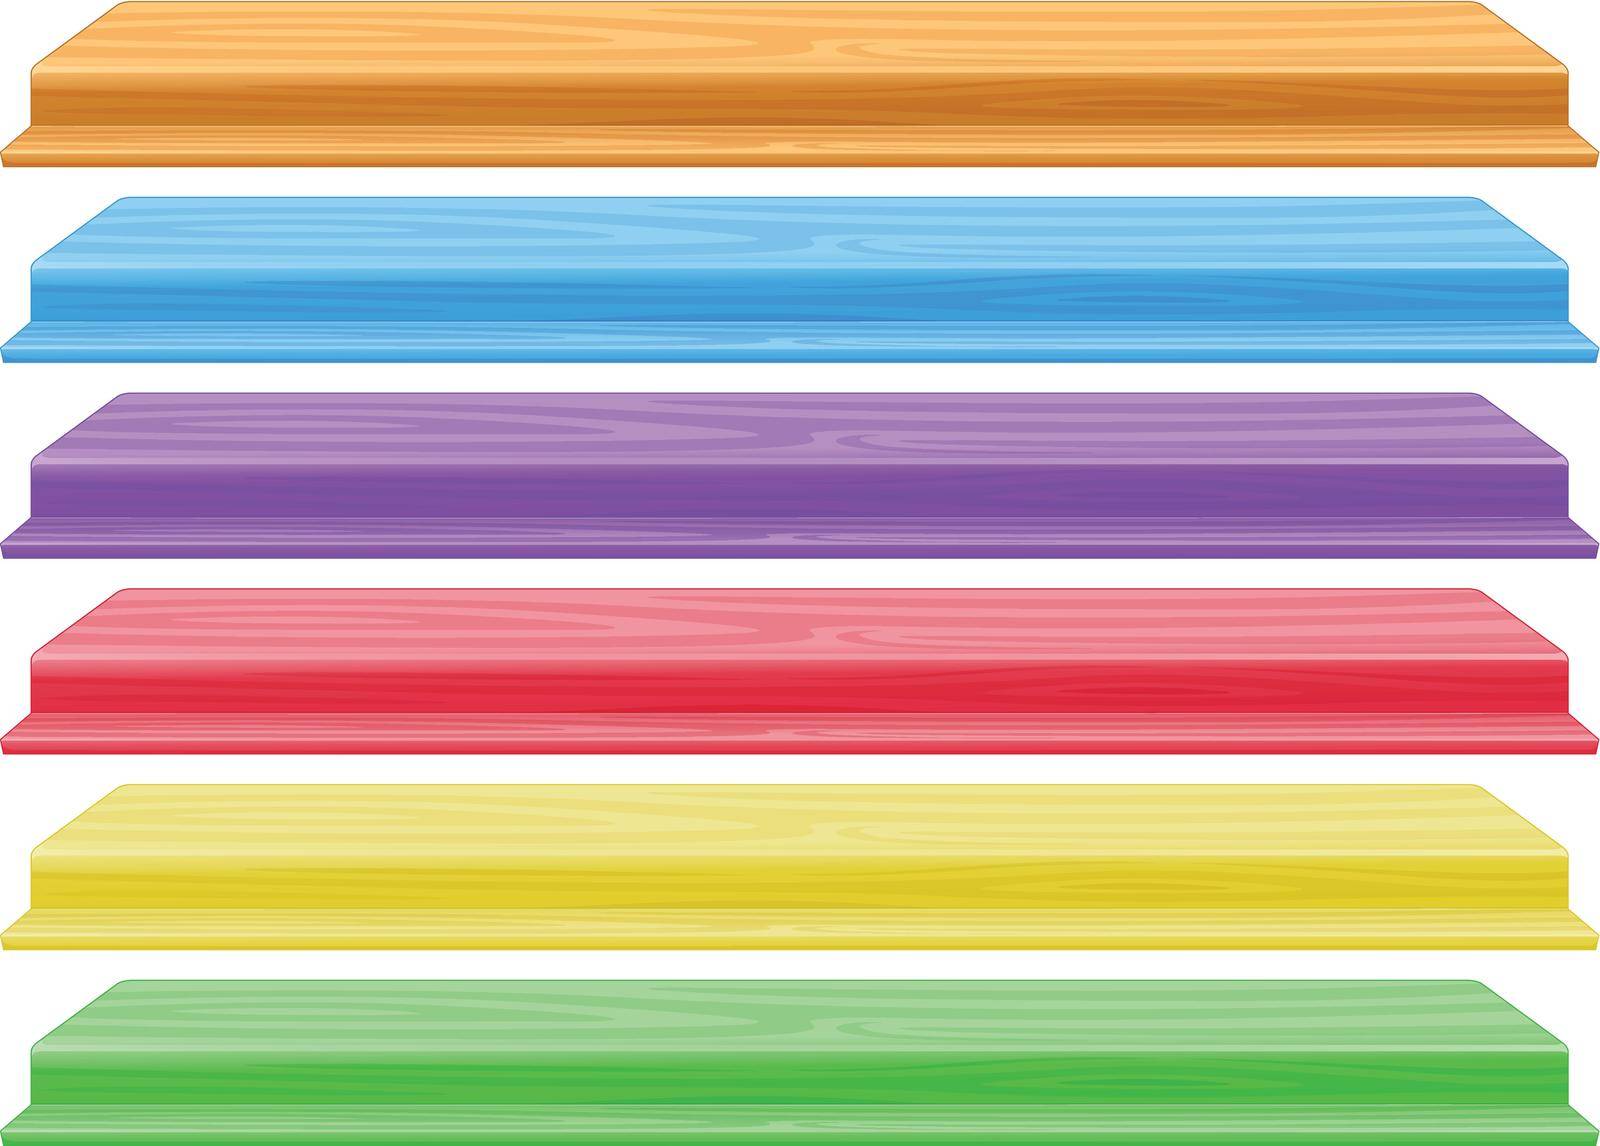 Illustration of the colourful shelves on a white background